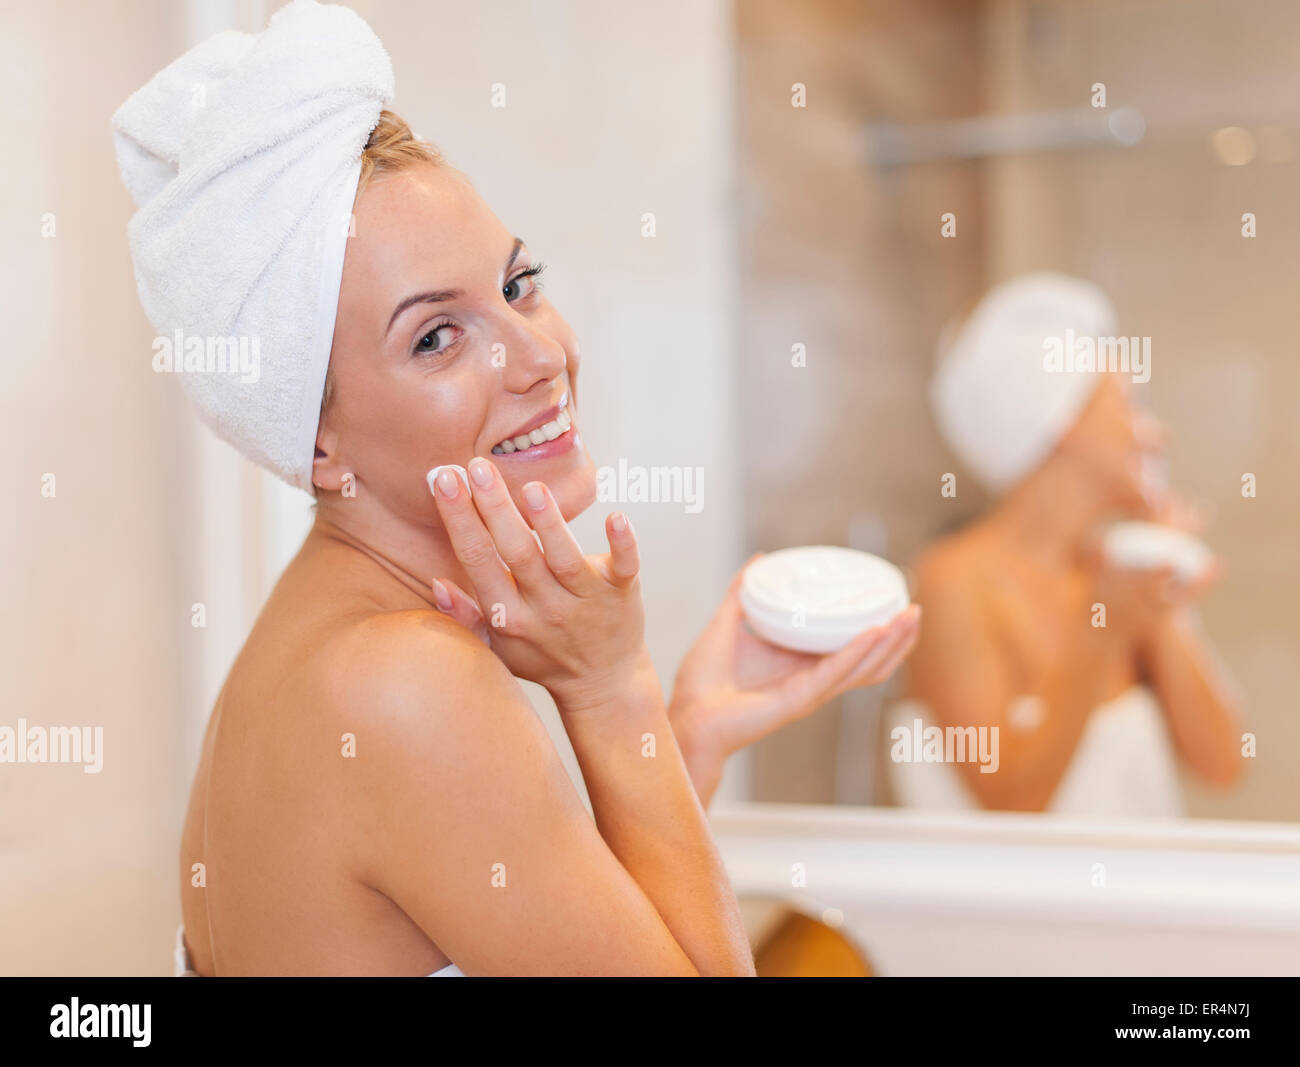 Happy woman applying moisturizer on face after the shower. Debica, Poland Stock Photo